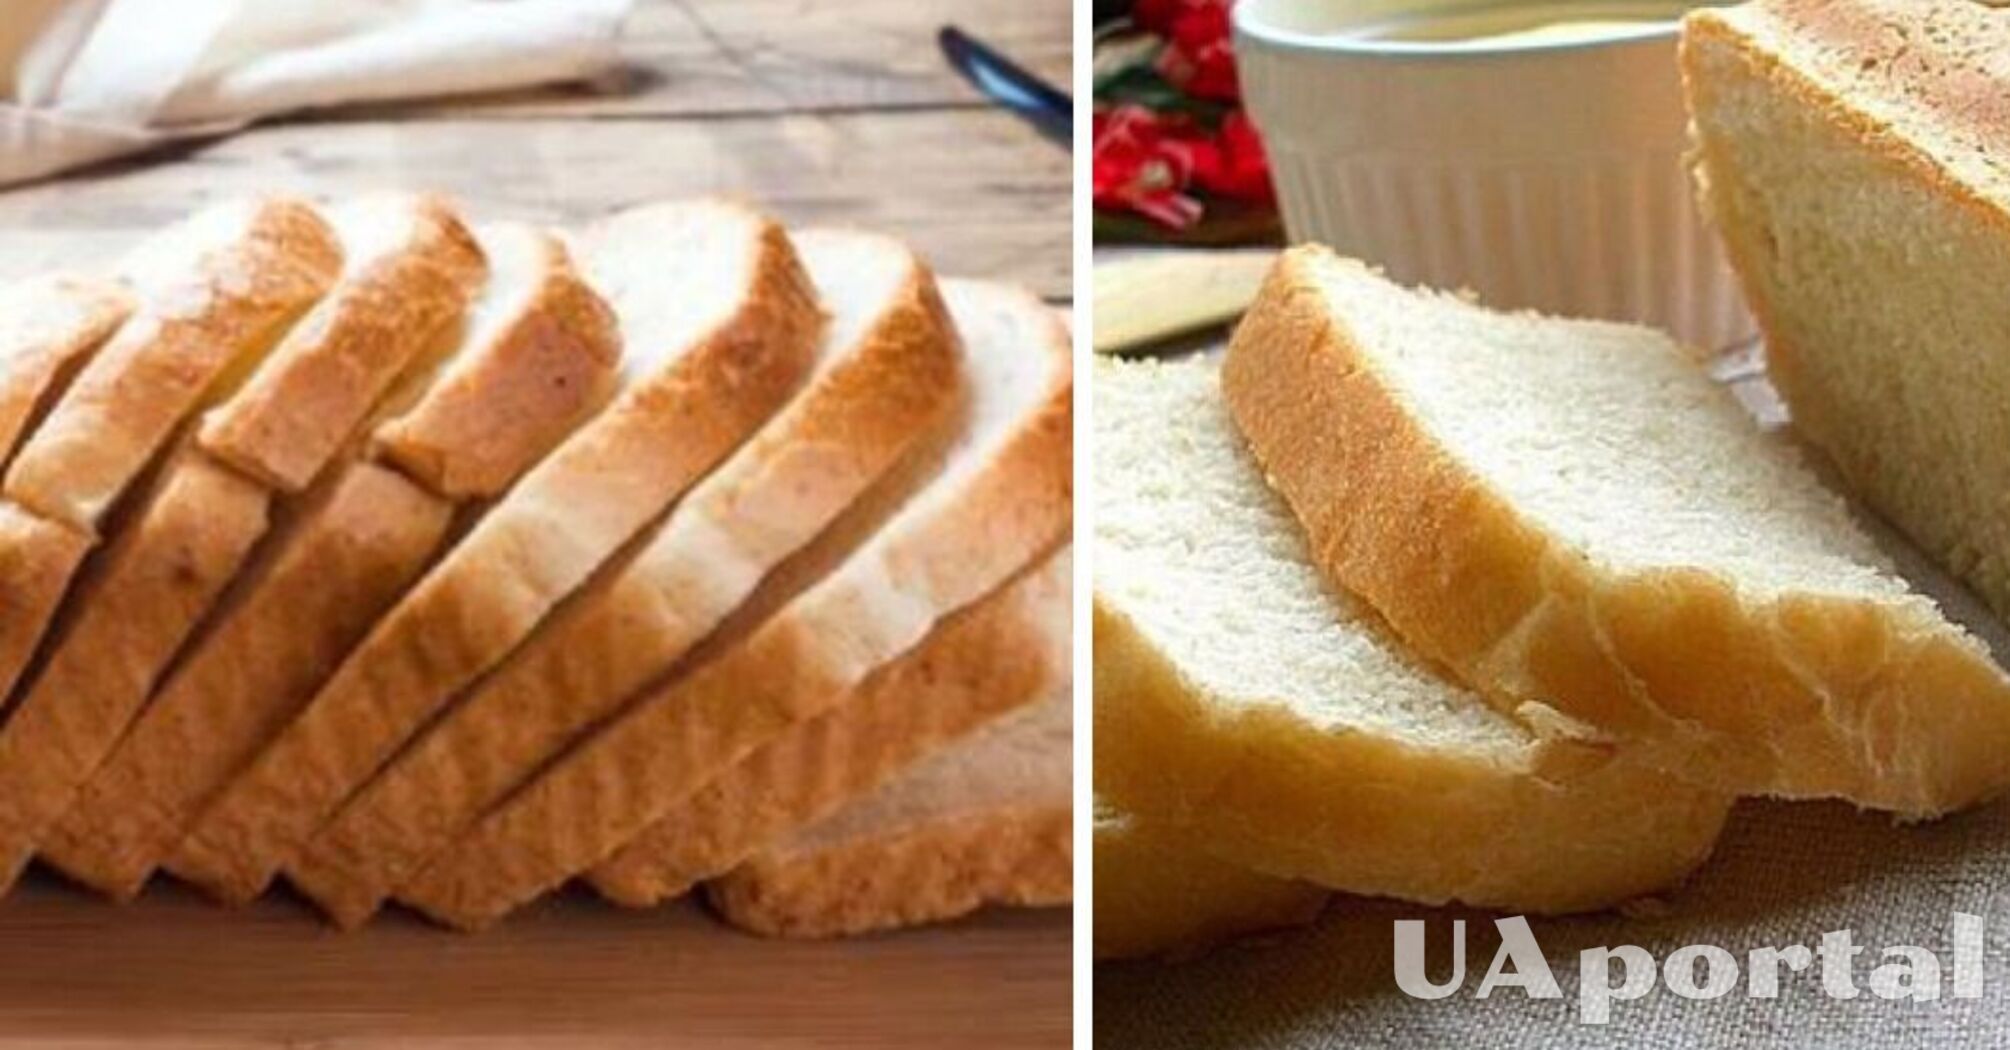 Can cause diabetes and gout: why you should minimize white bread consumption